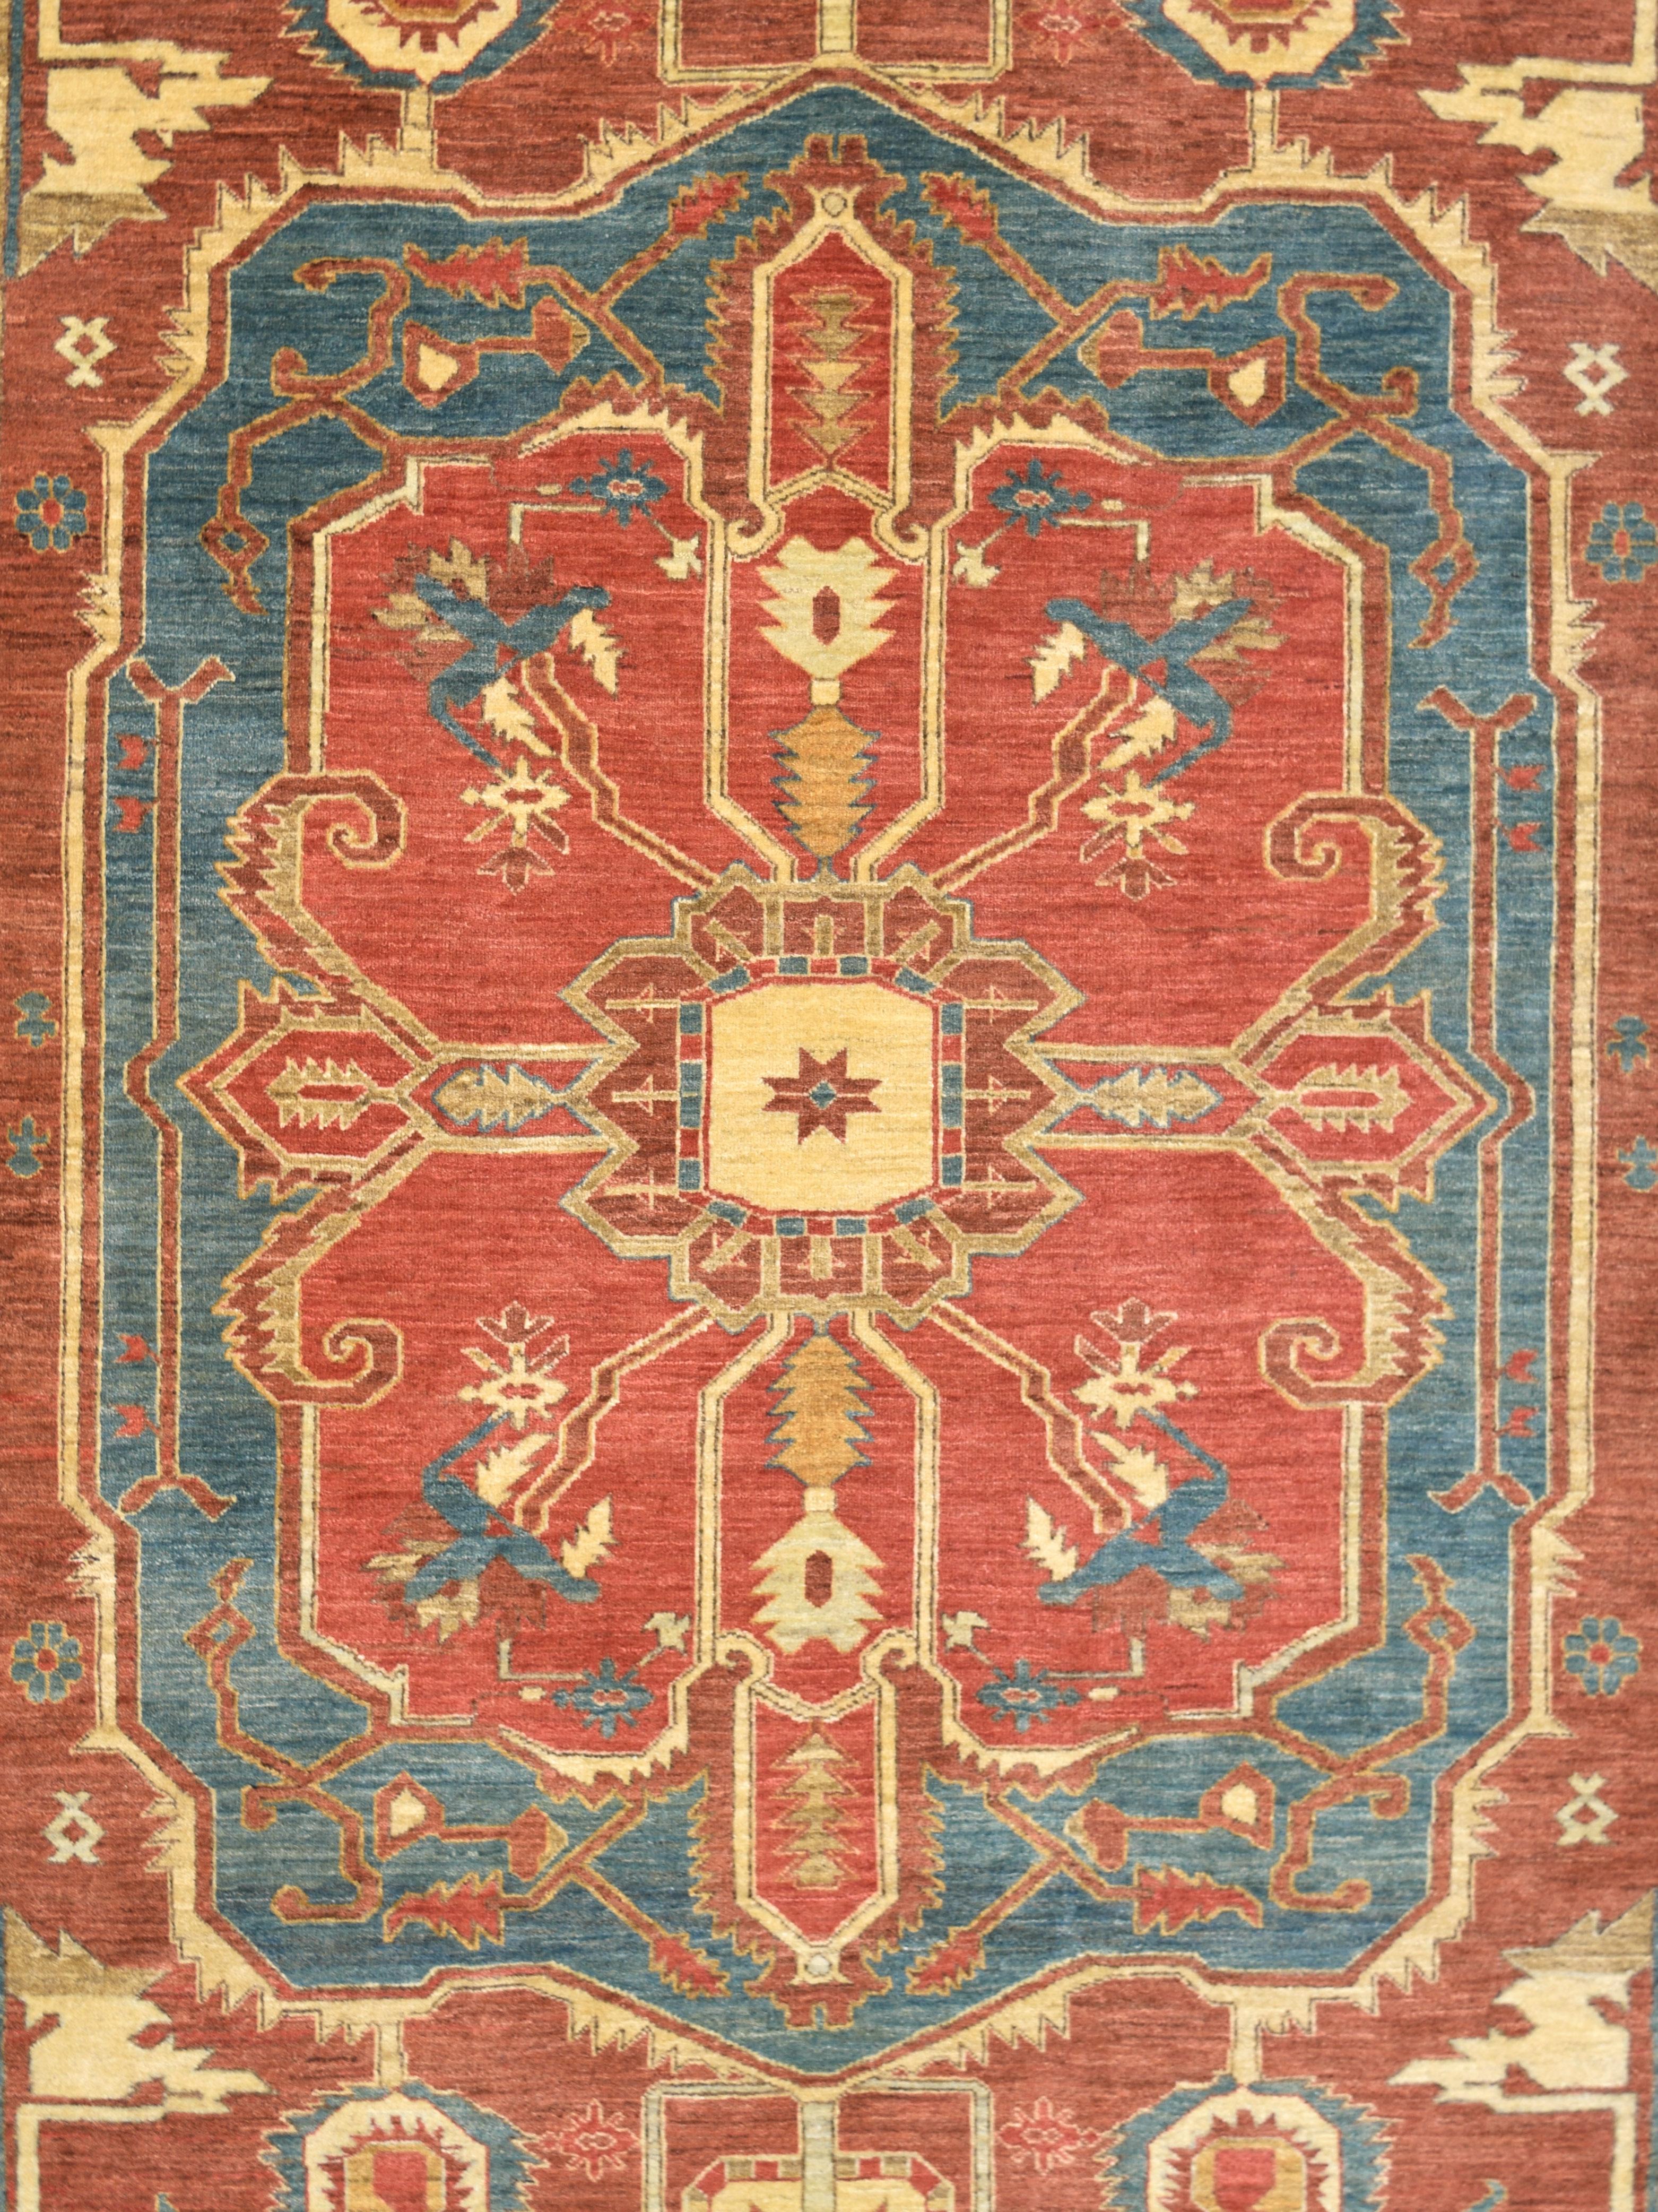 Wool Transitional Bidjar Heriz from Orley Shabahang’s Formal Collection 9’ x 12’.
In full bloom, this warm and transitional Persian Heriz Serapi carpet measures exactly 9' x 12' and belongs to the Orley Shabahang Formal Collection. Typical of Serapi